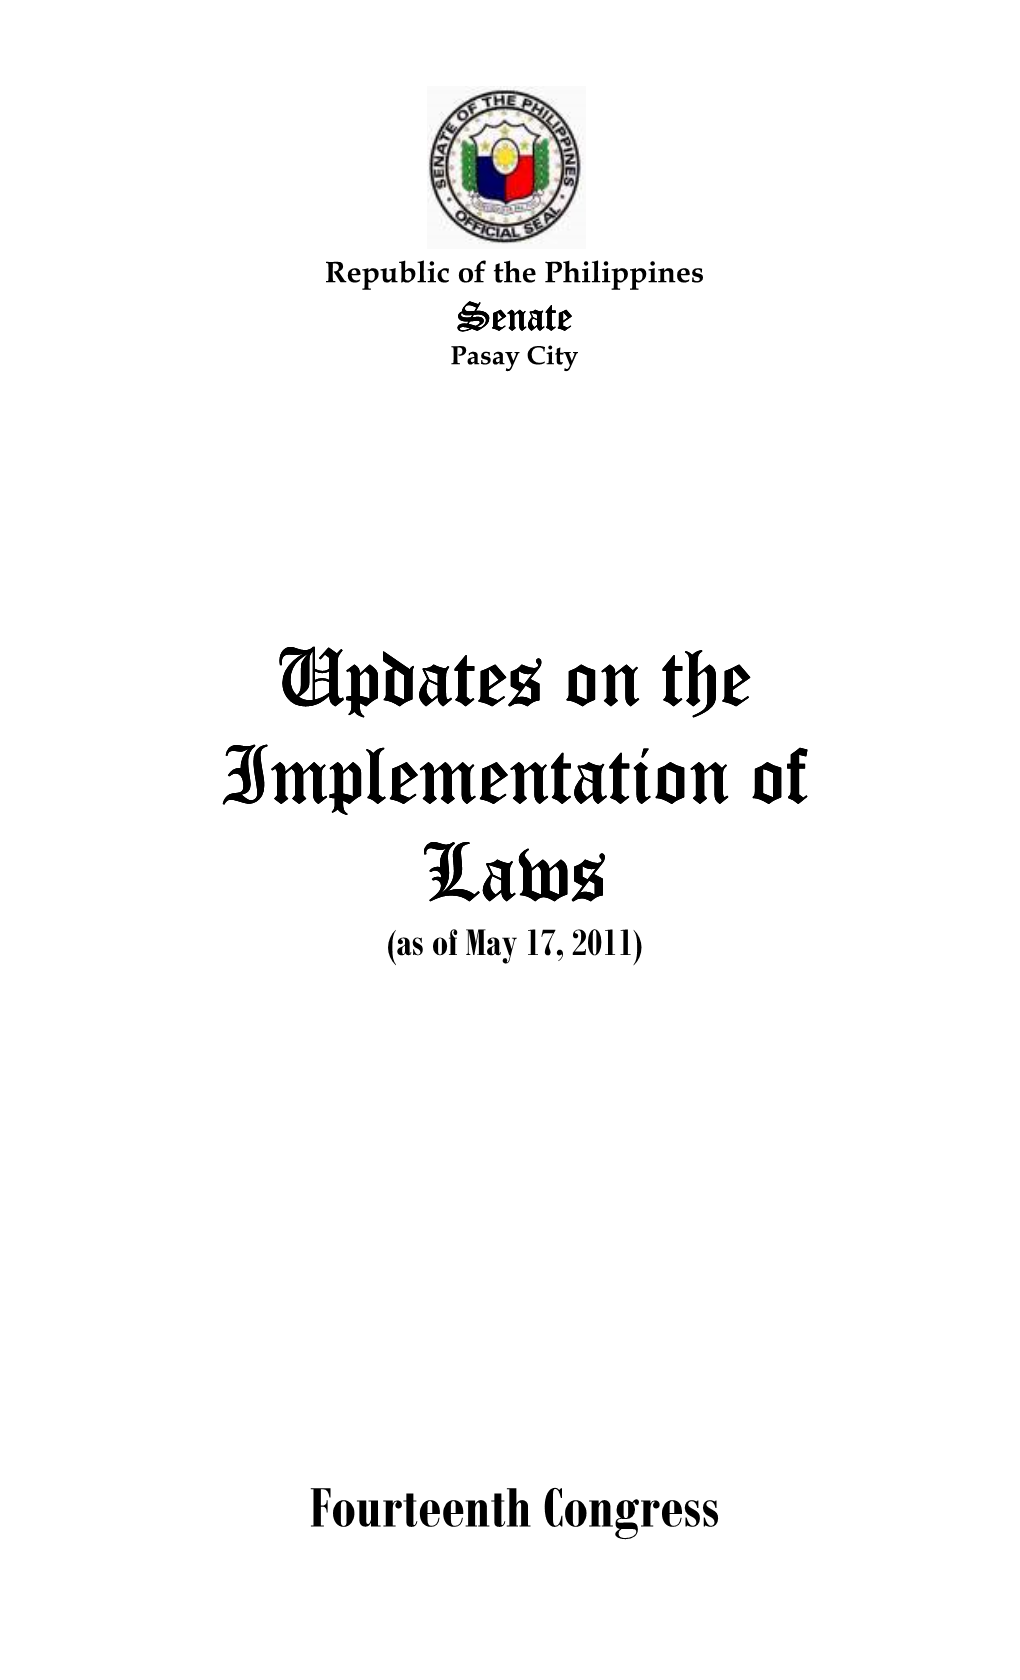 Book-MONITORING of IMPLEMENTATION of LAWS (14Th Congress).Pdf